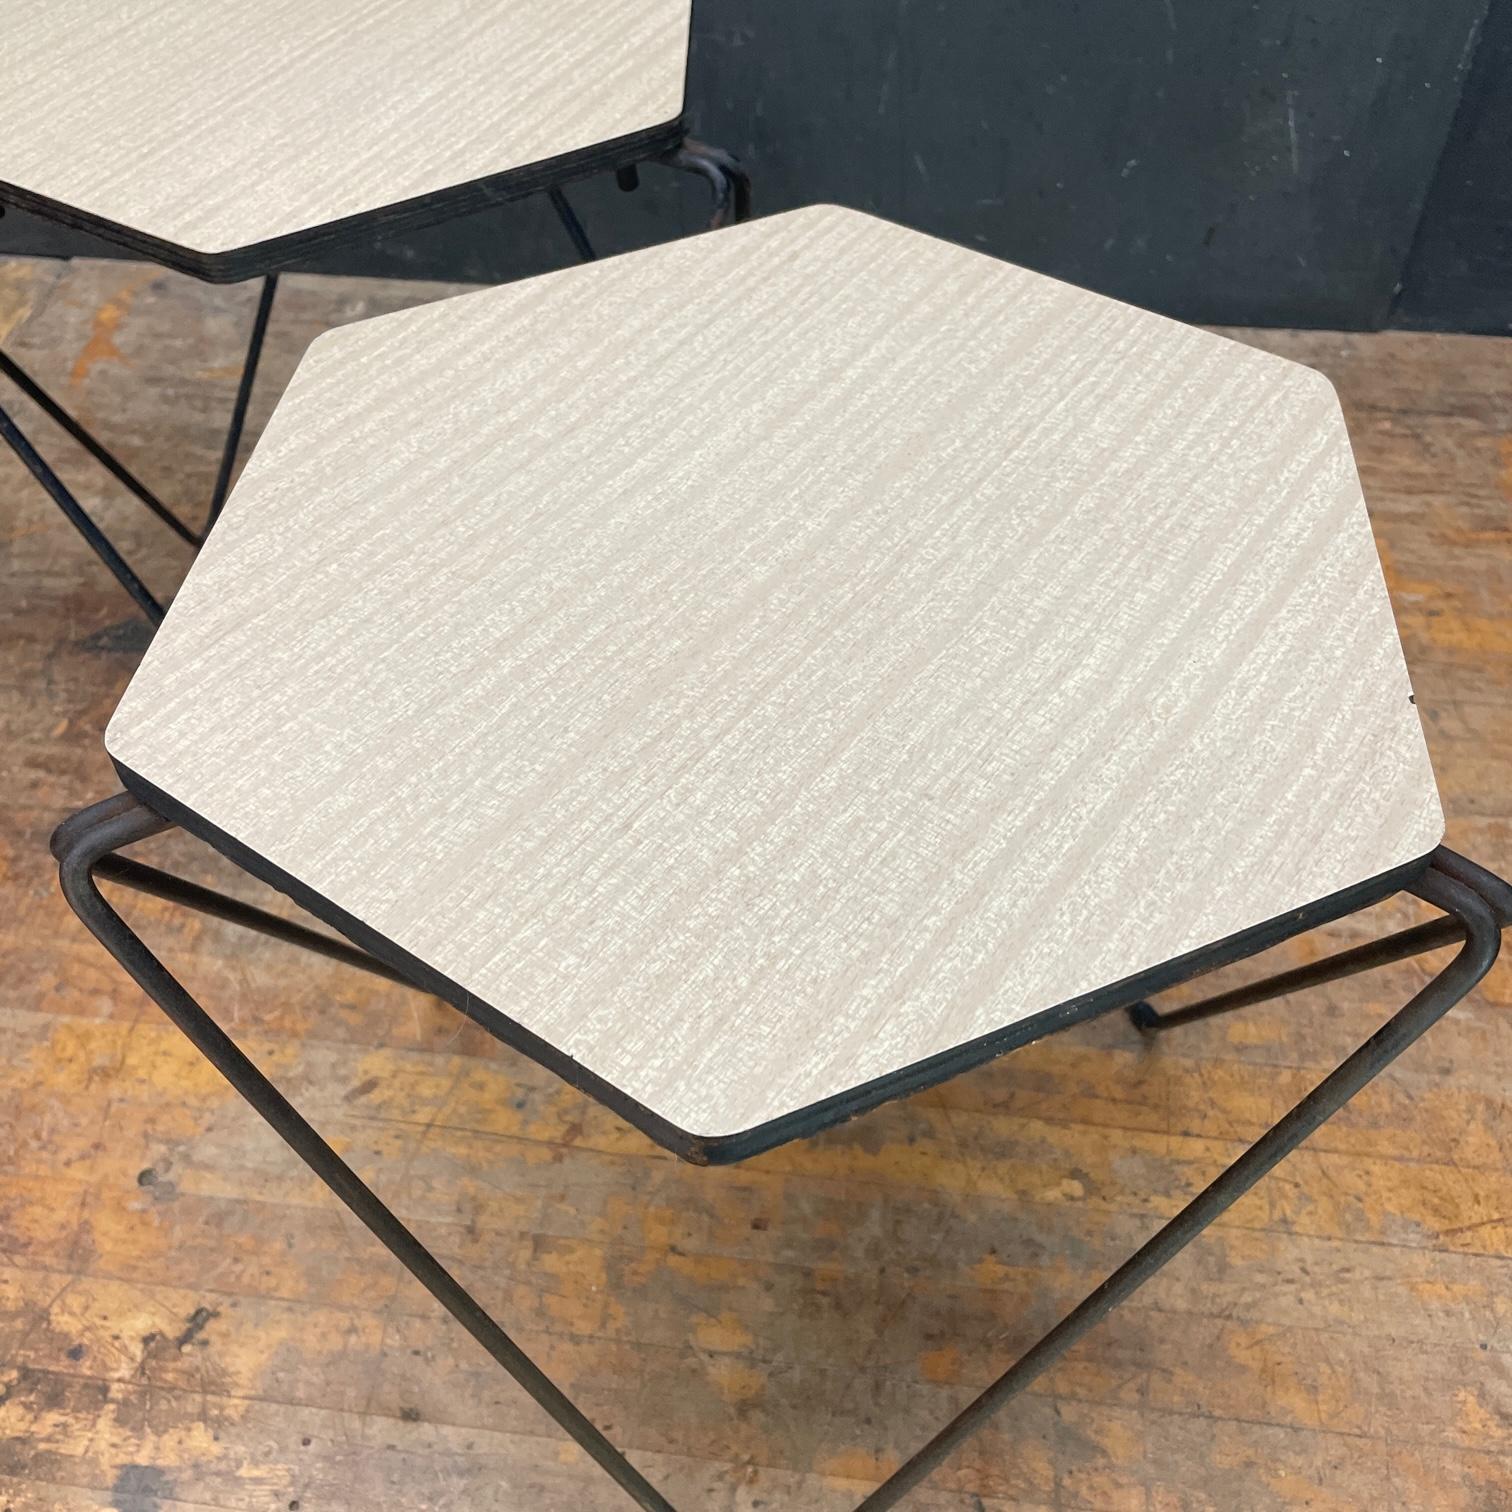 1950s Architects Prismatic Stacking Tables Pair Mid-Century Geometric Pedestal For Sale 2